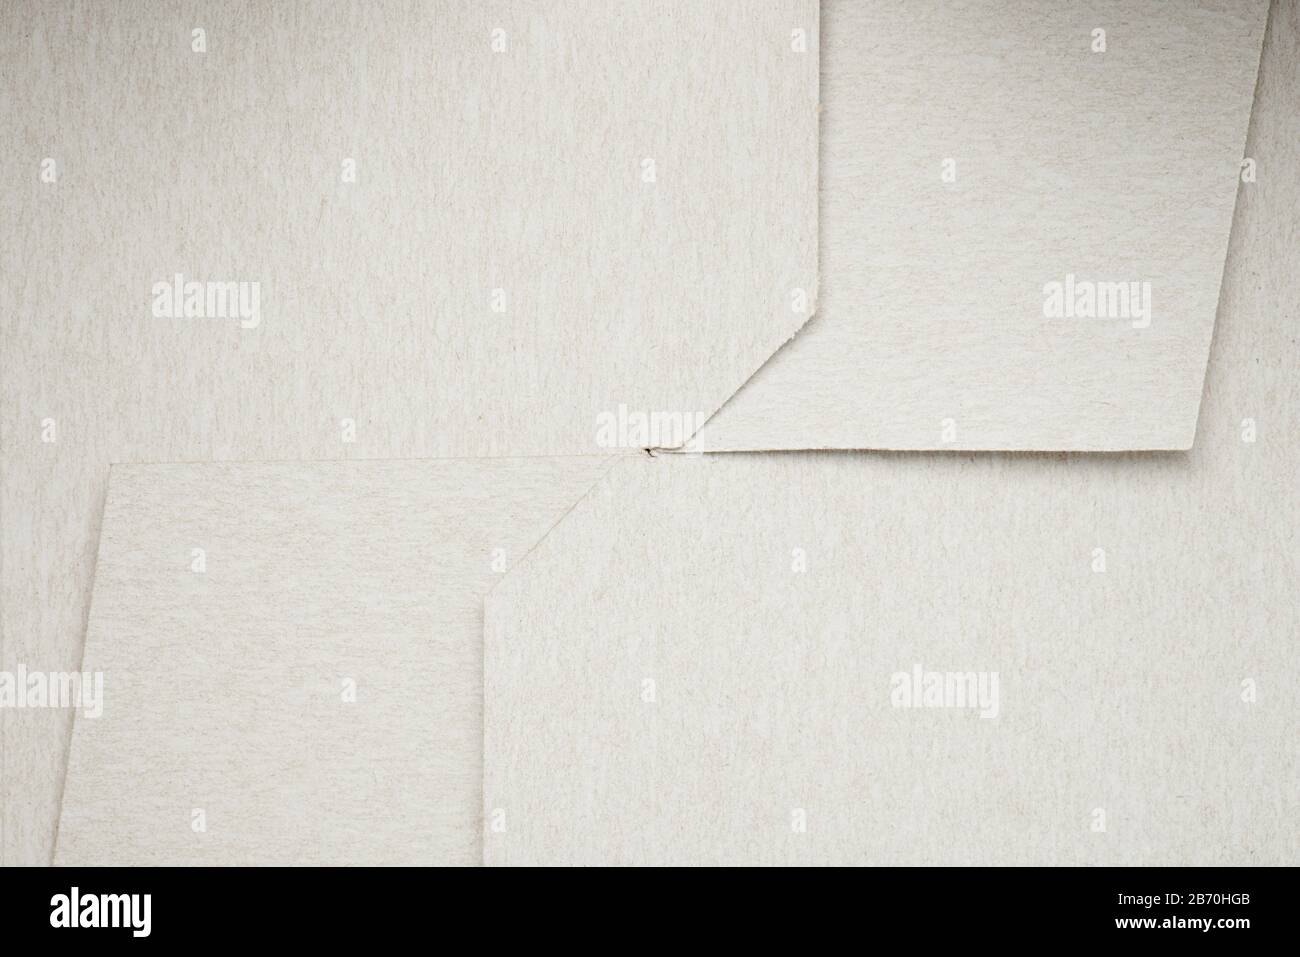 White folded paper surface close up view. Crossed box paper Stock Photo